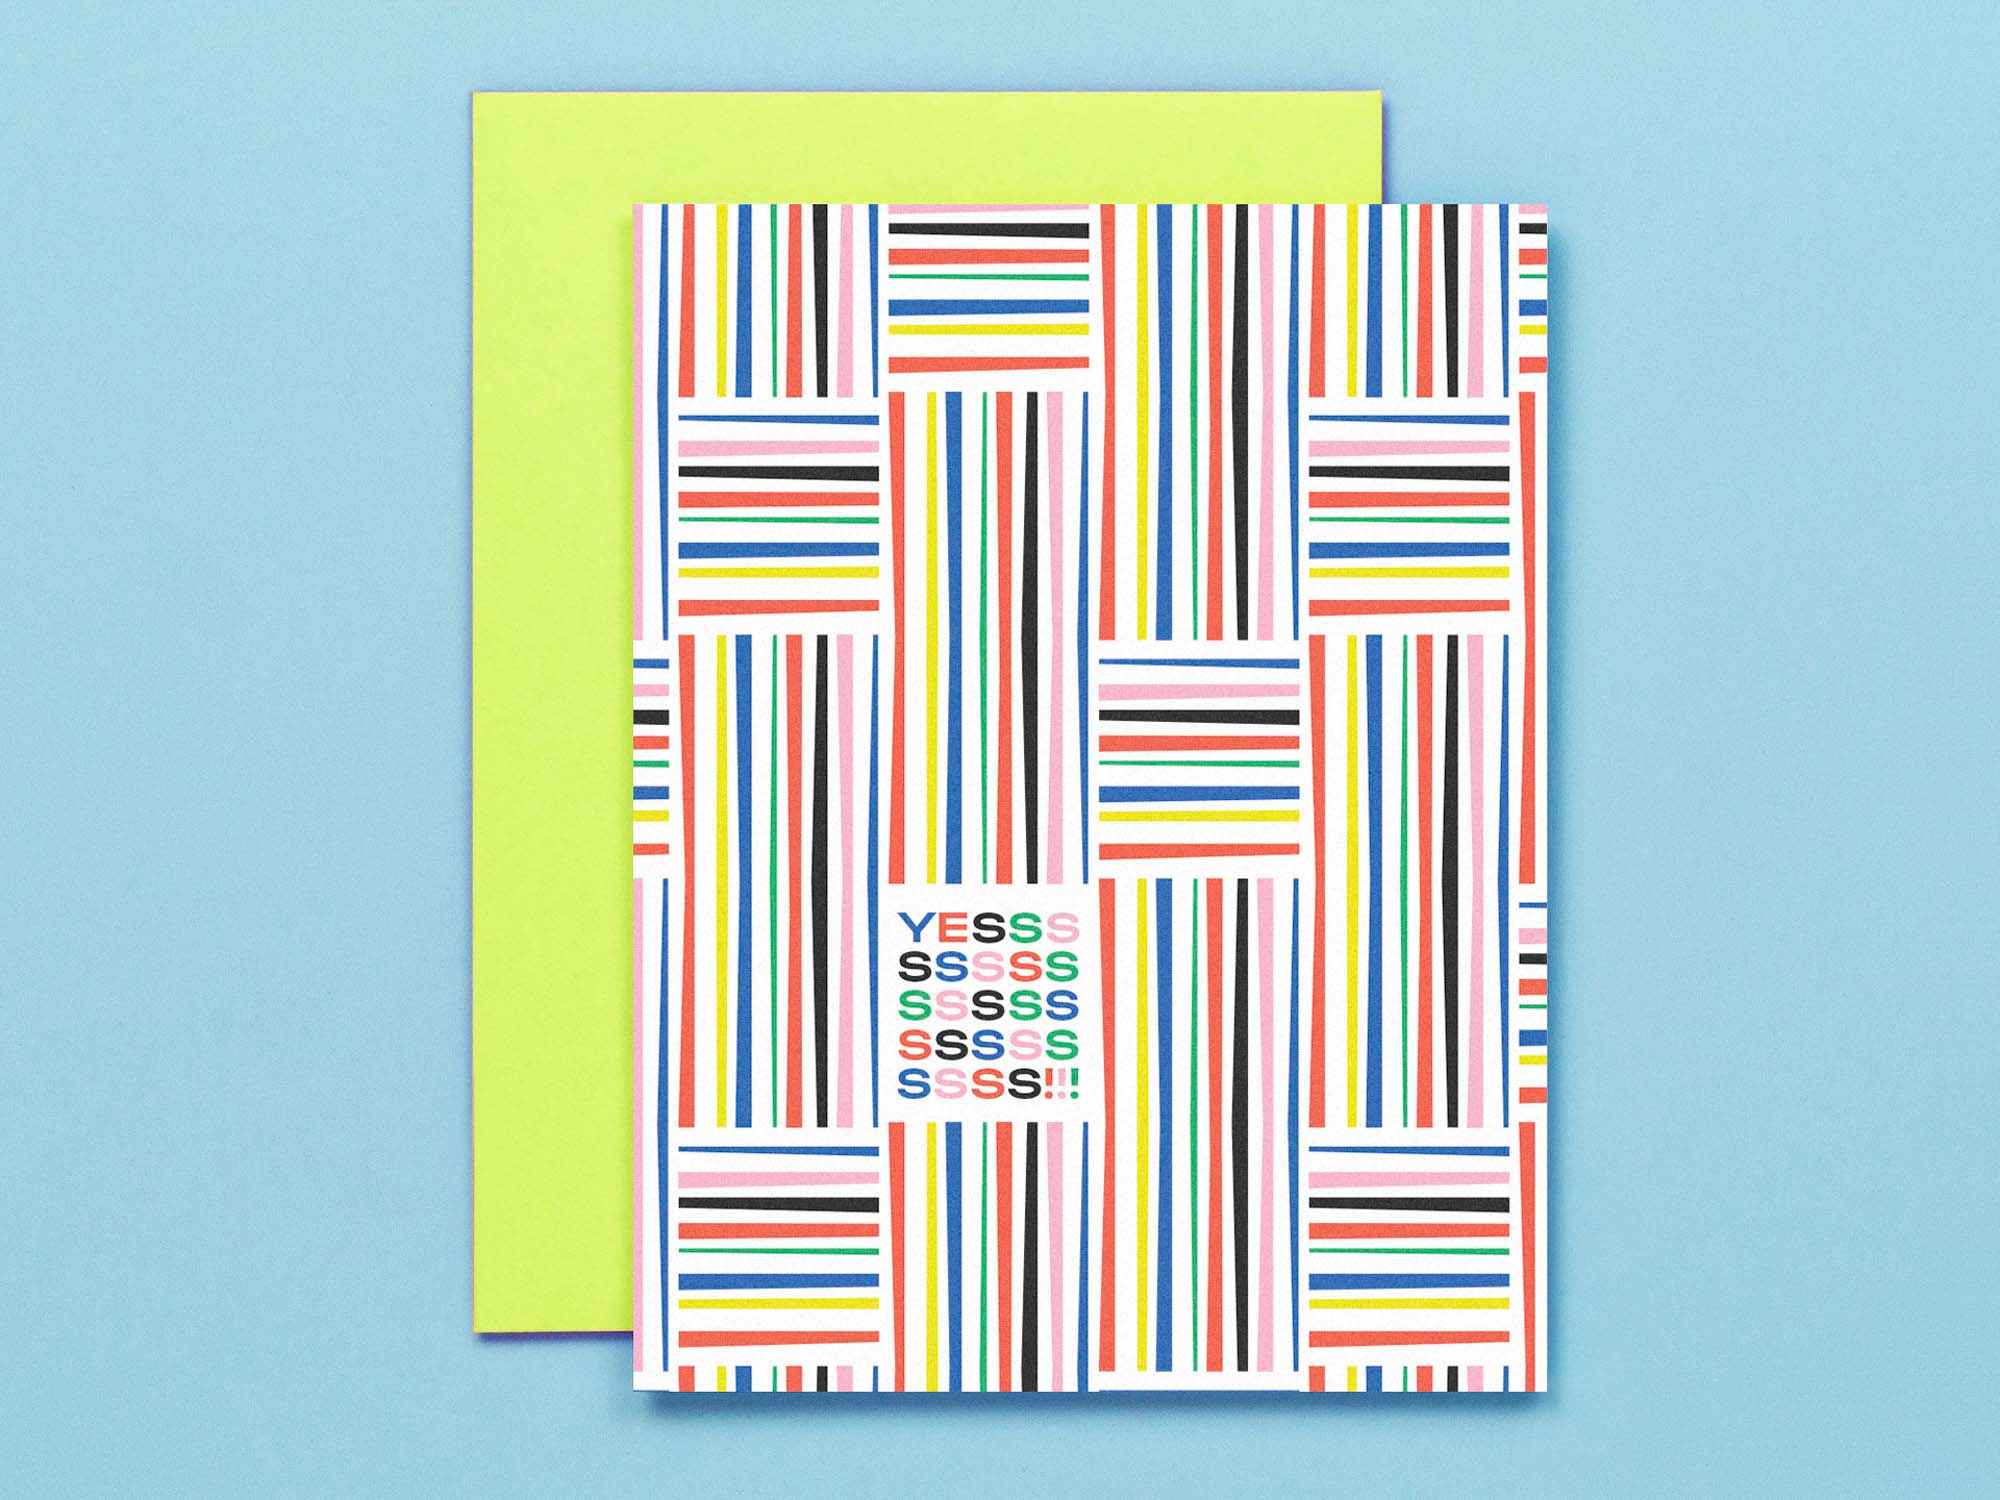 Mid-century inspired "Yessss" congrats or encouragement card with a pattern of stripes on stripes. Made in USA by @mydarlin_bk